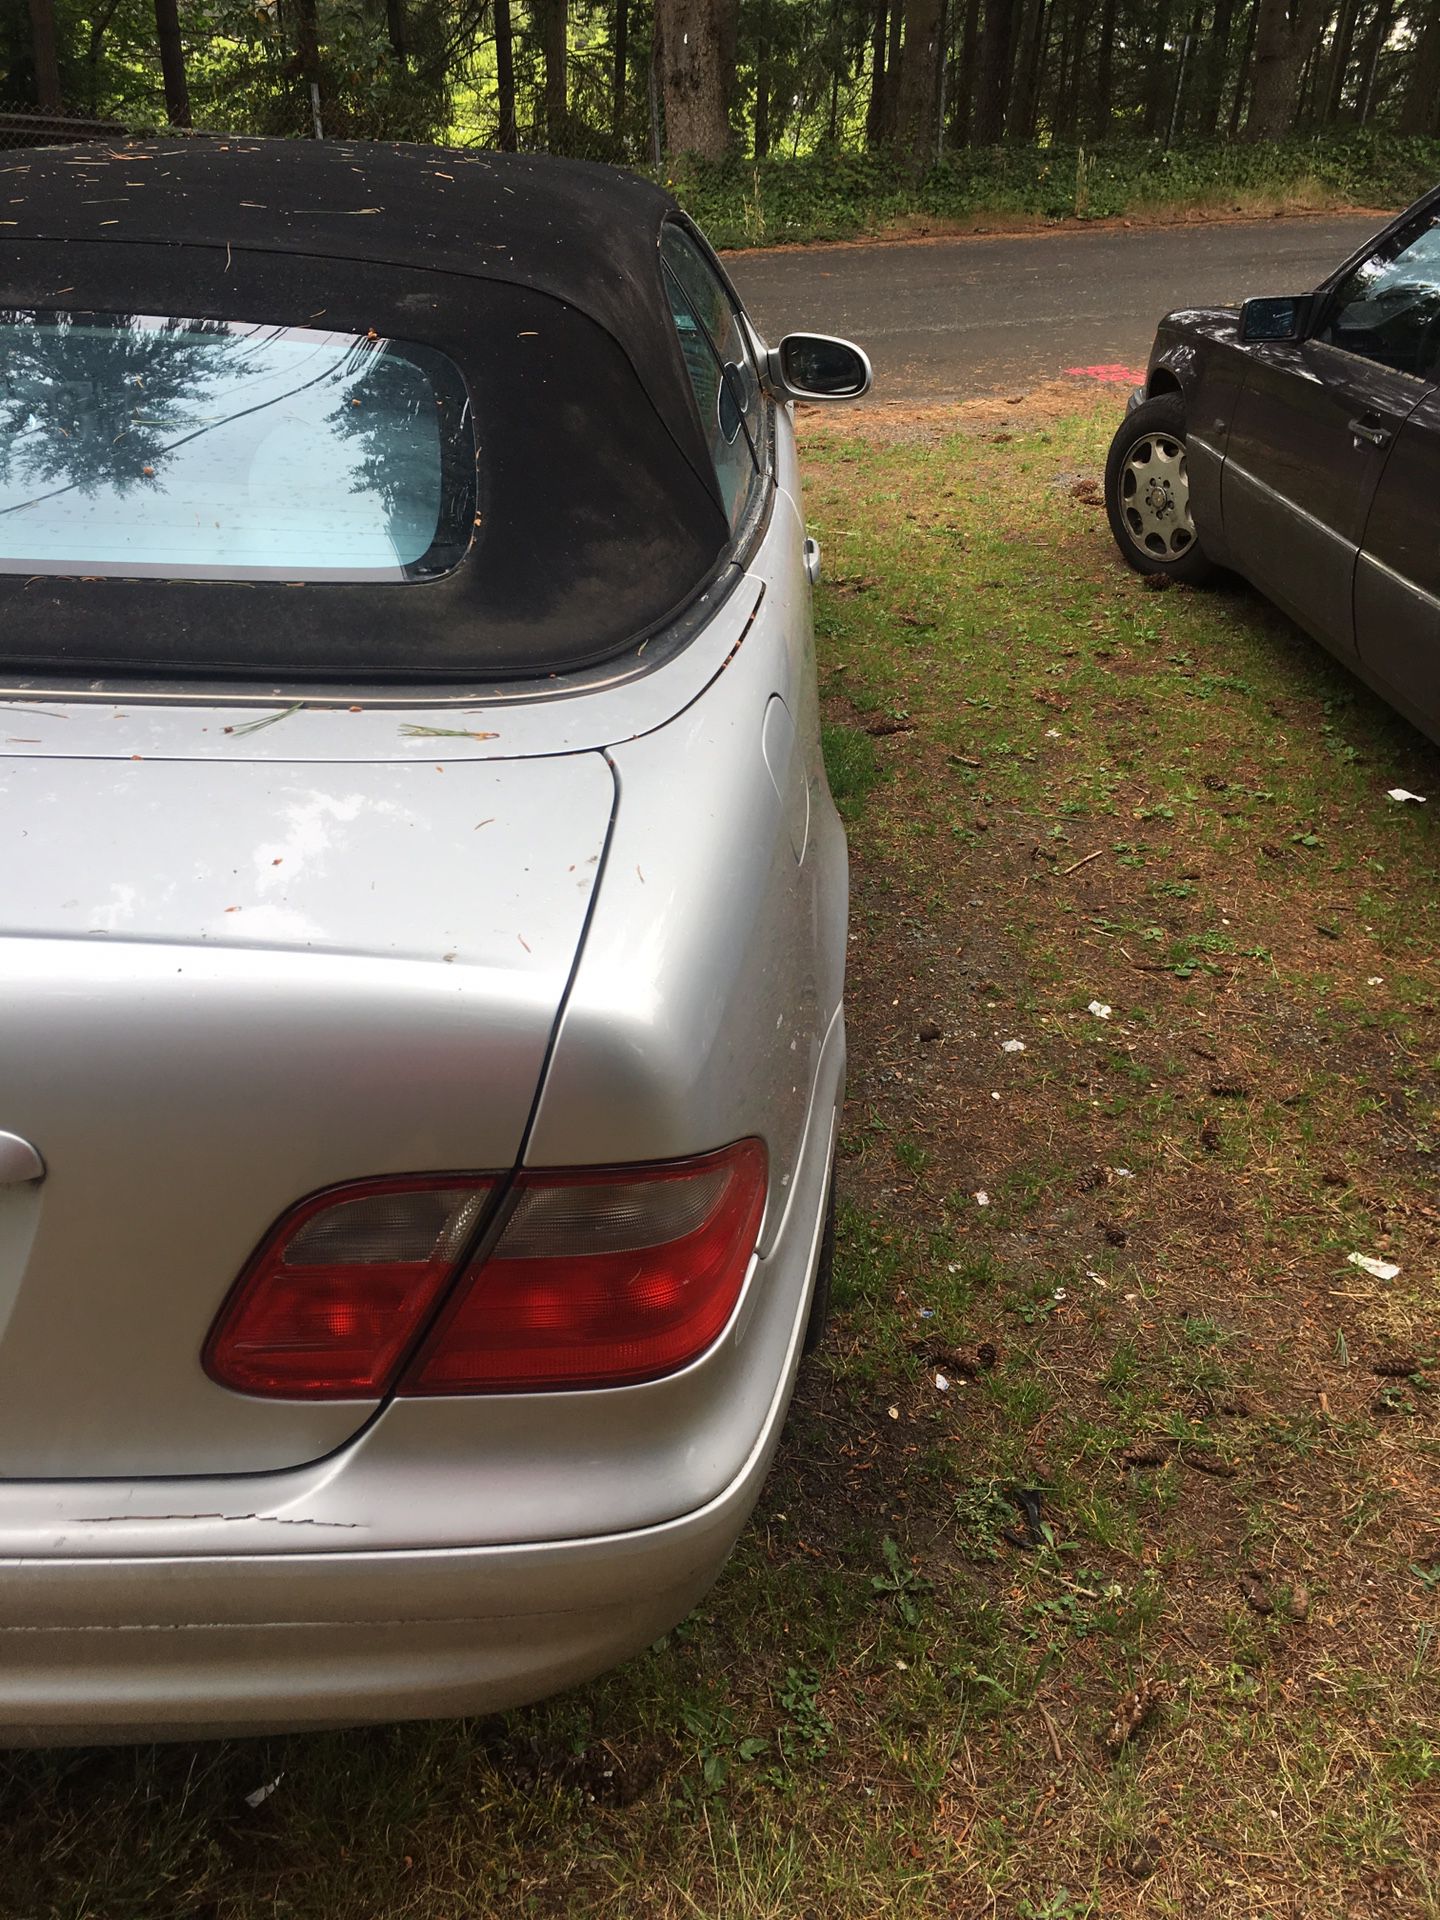 2002 Mercedes clk430 part out 4 tires 95% good Finders hood head light doors trunk top is like brand new engine and transmission is good mileage 159